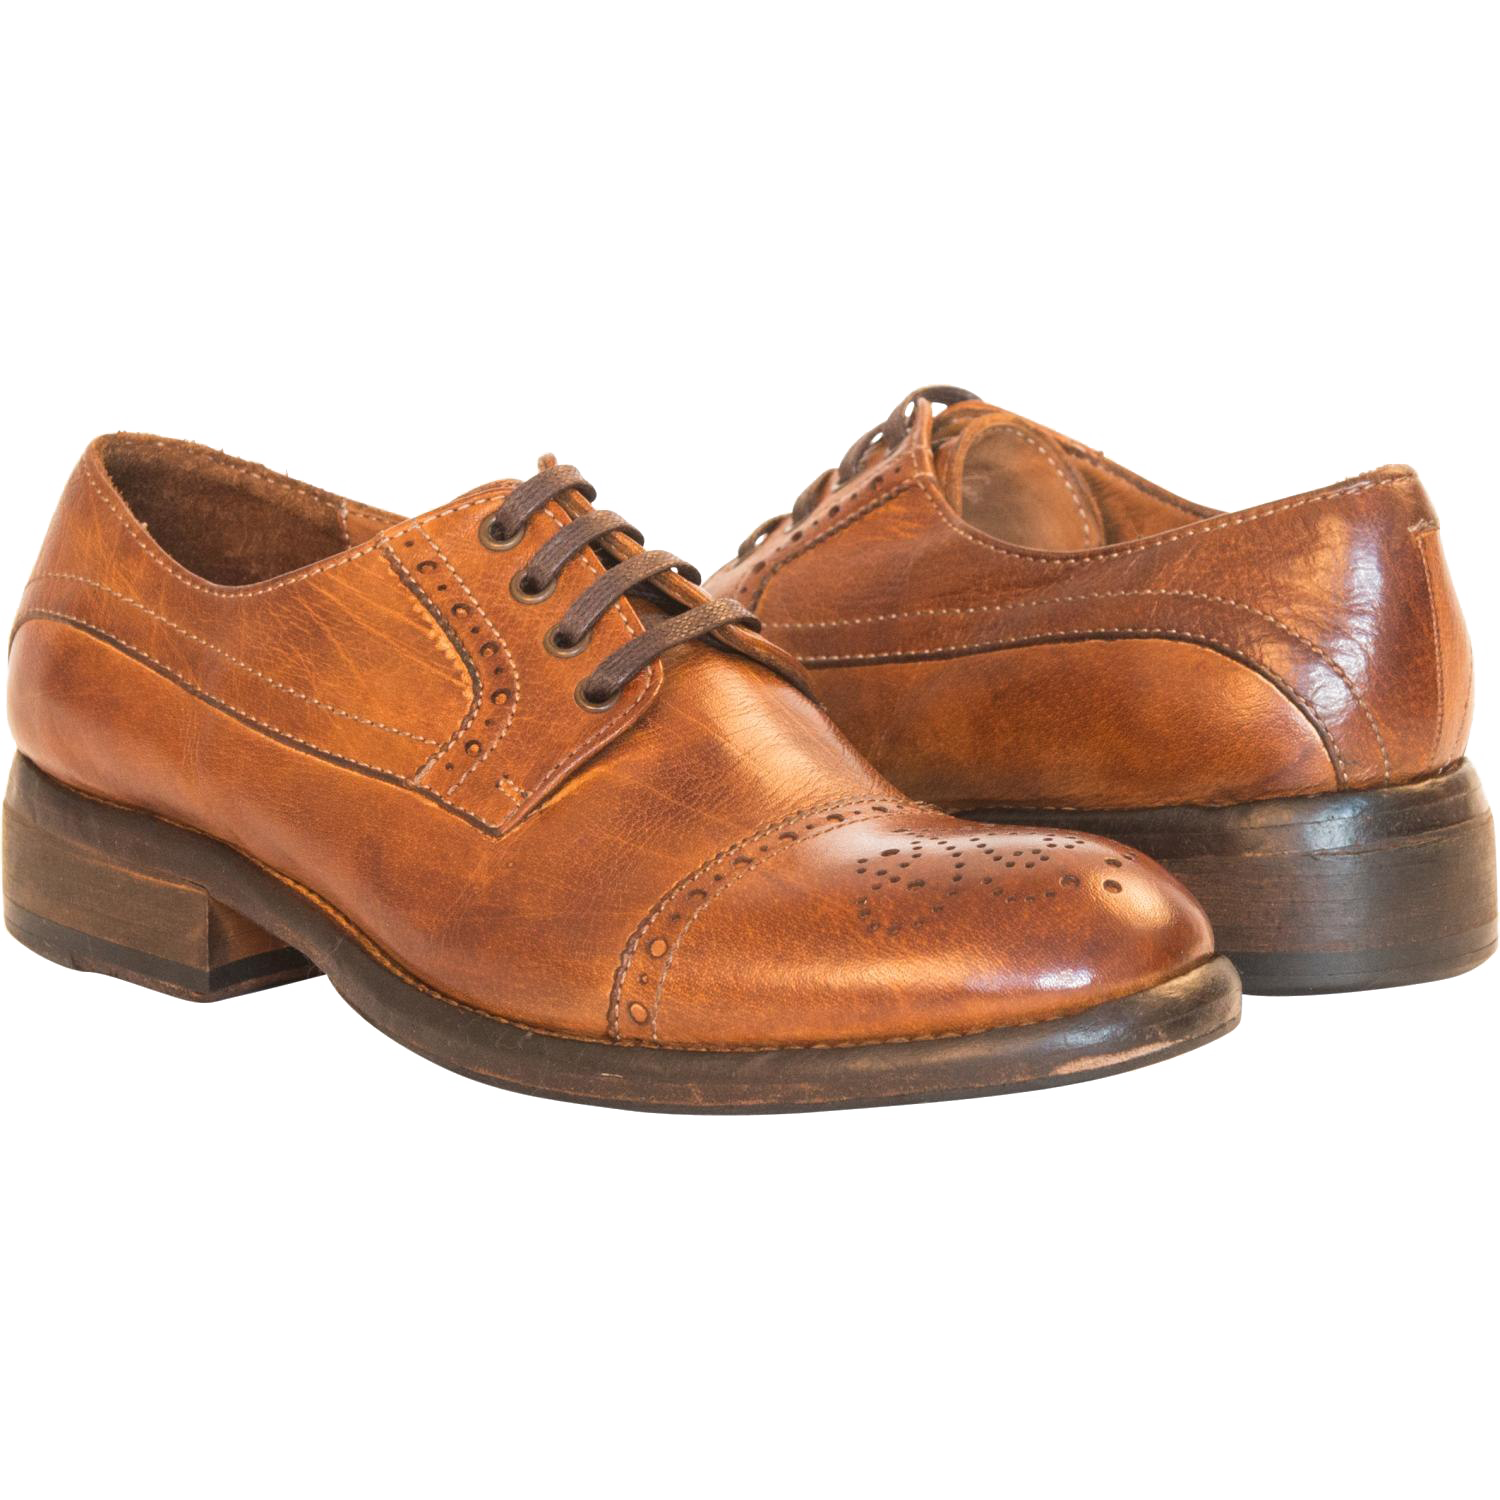 Brown Shoes PNG Image Background